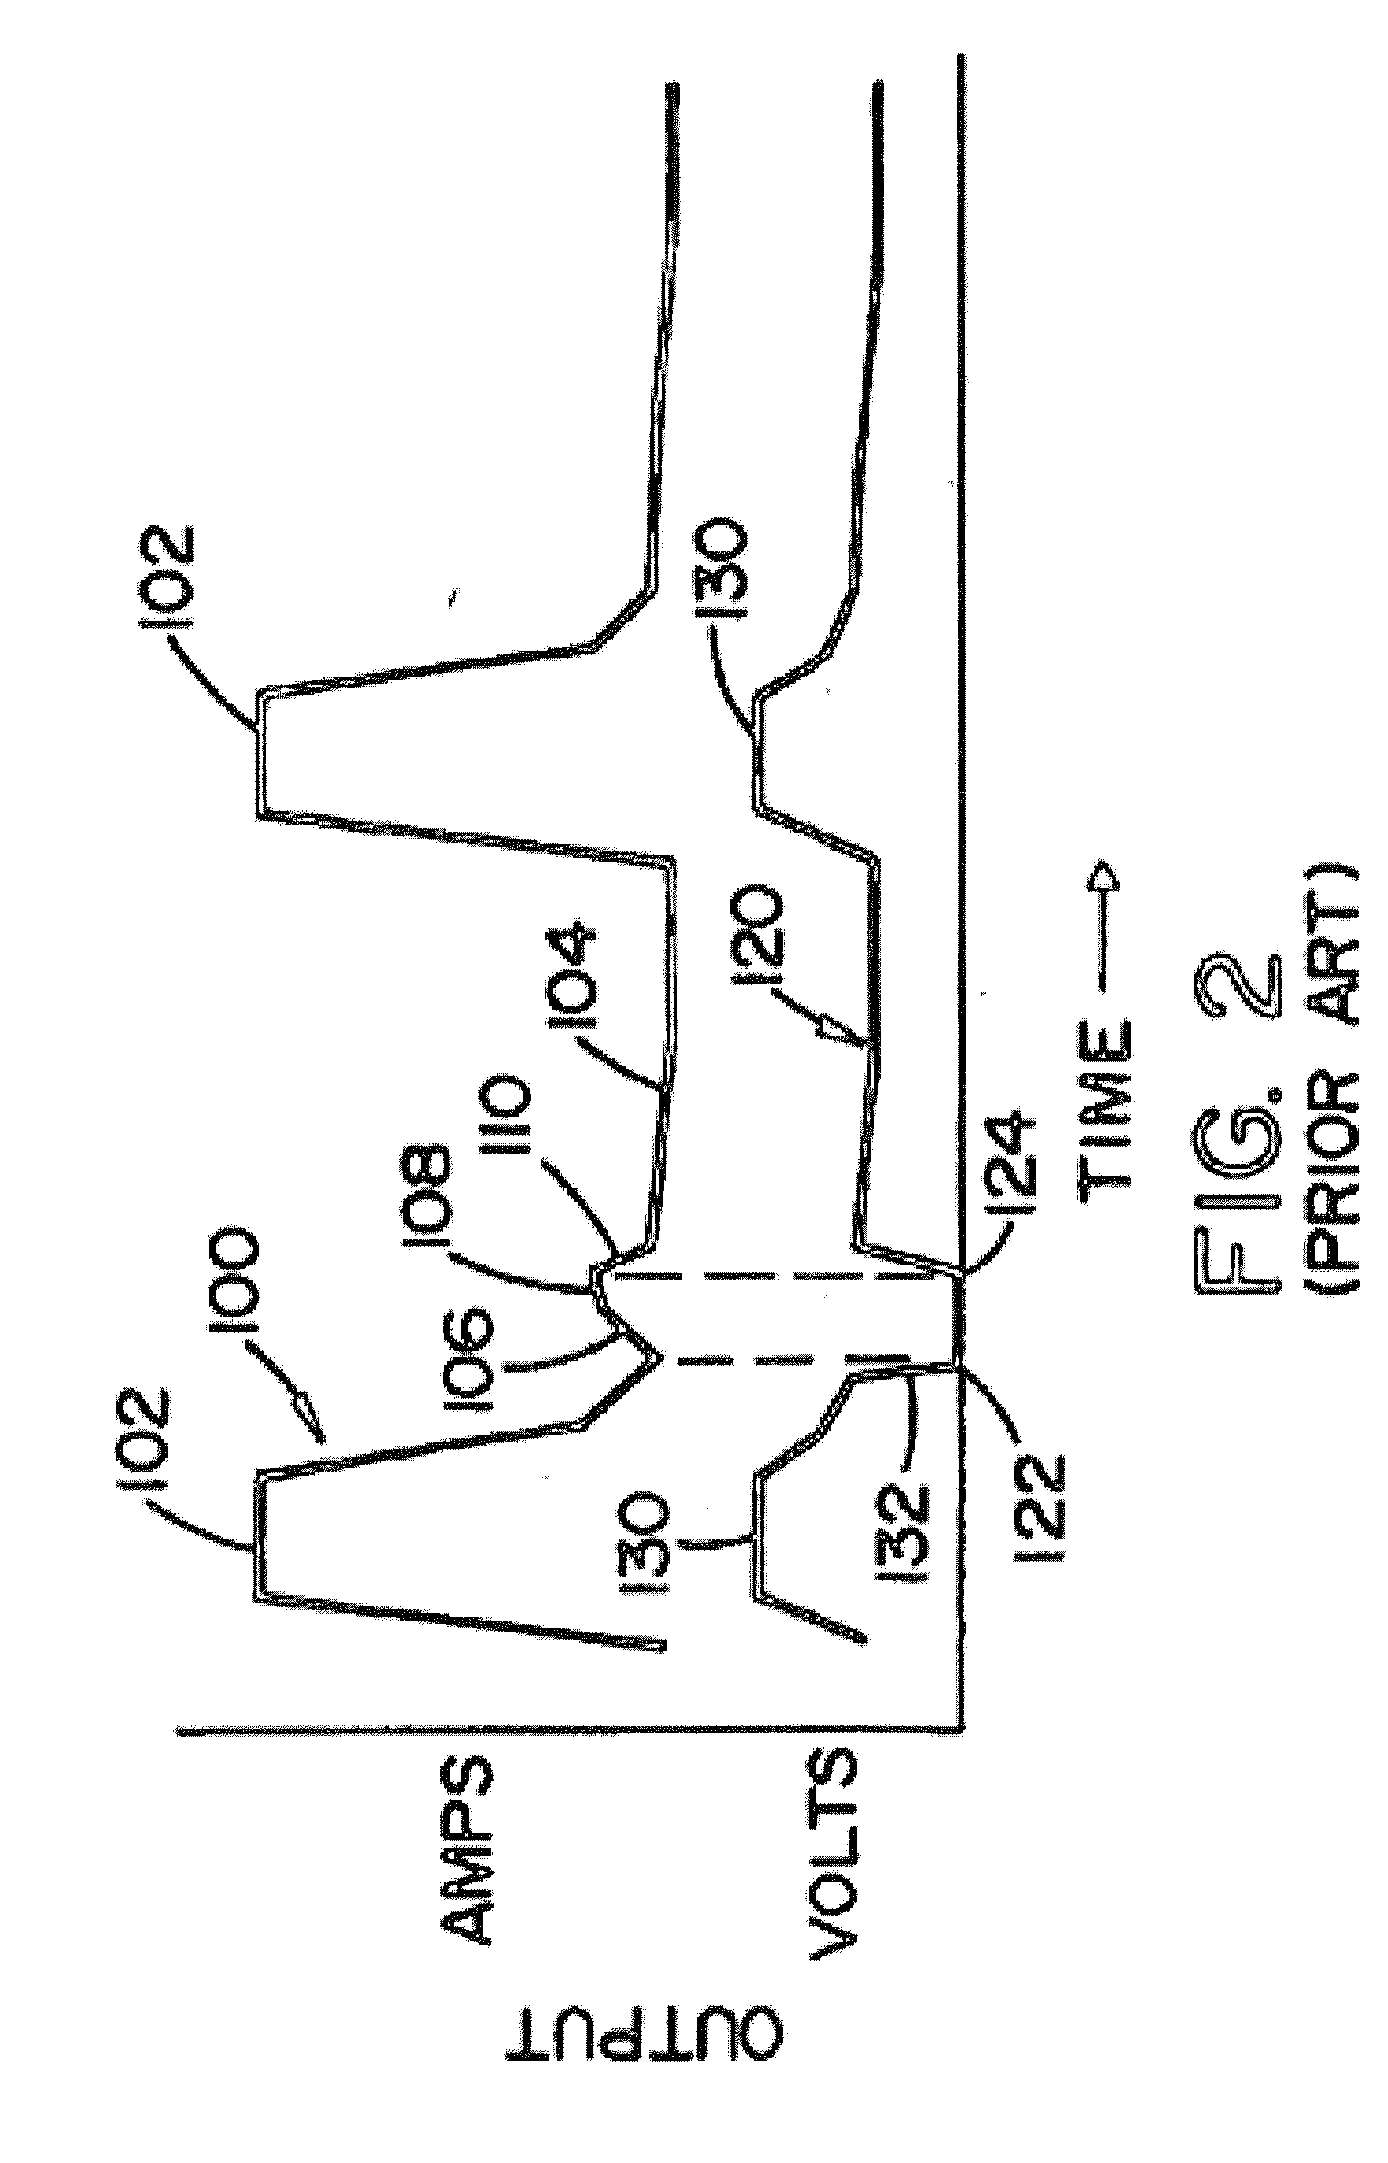 Method and device to build-up, clad, or hard-face with minimal admixture